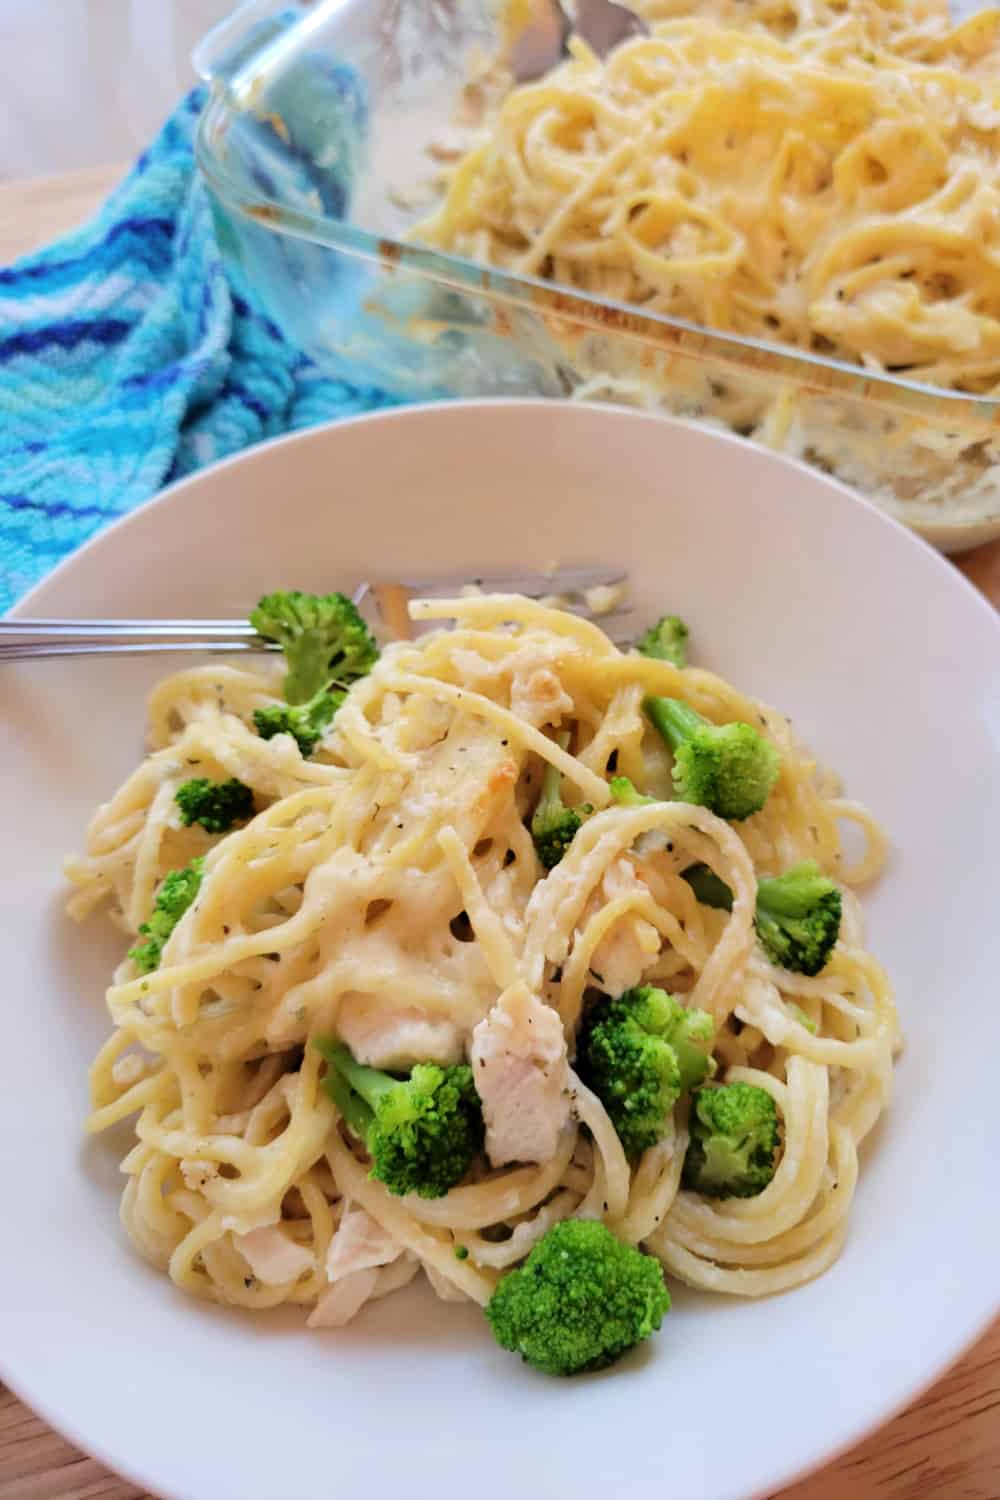 Easy Chicken Broccoli Pasta Bake is a meal the whole family will love. The best part is you can make this creamy and cheesy pasta in 30 minutes! via @jugglingactmama